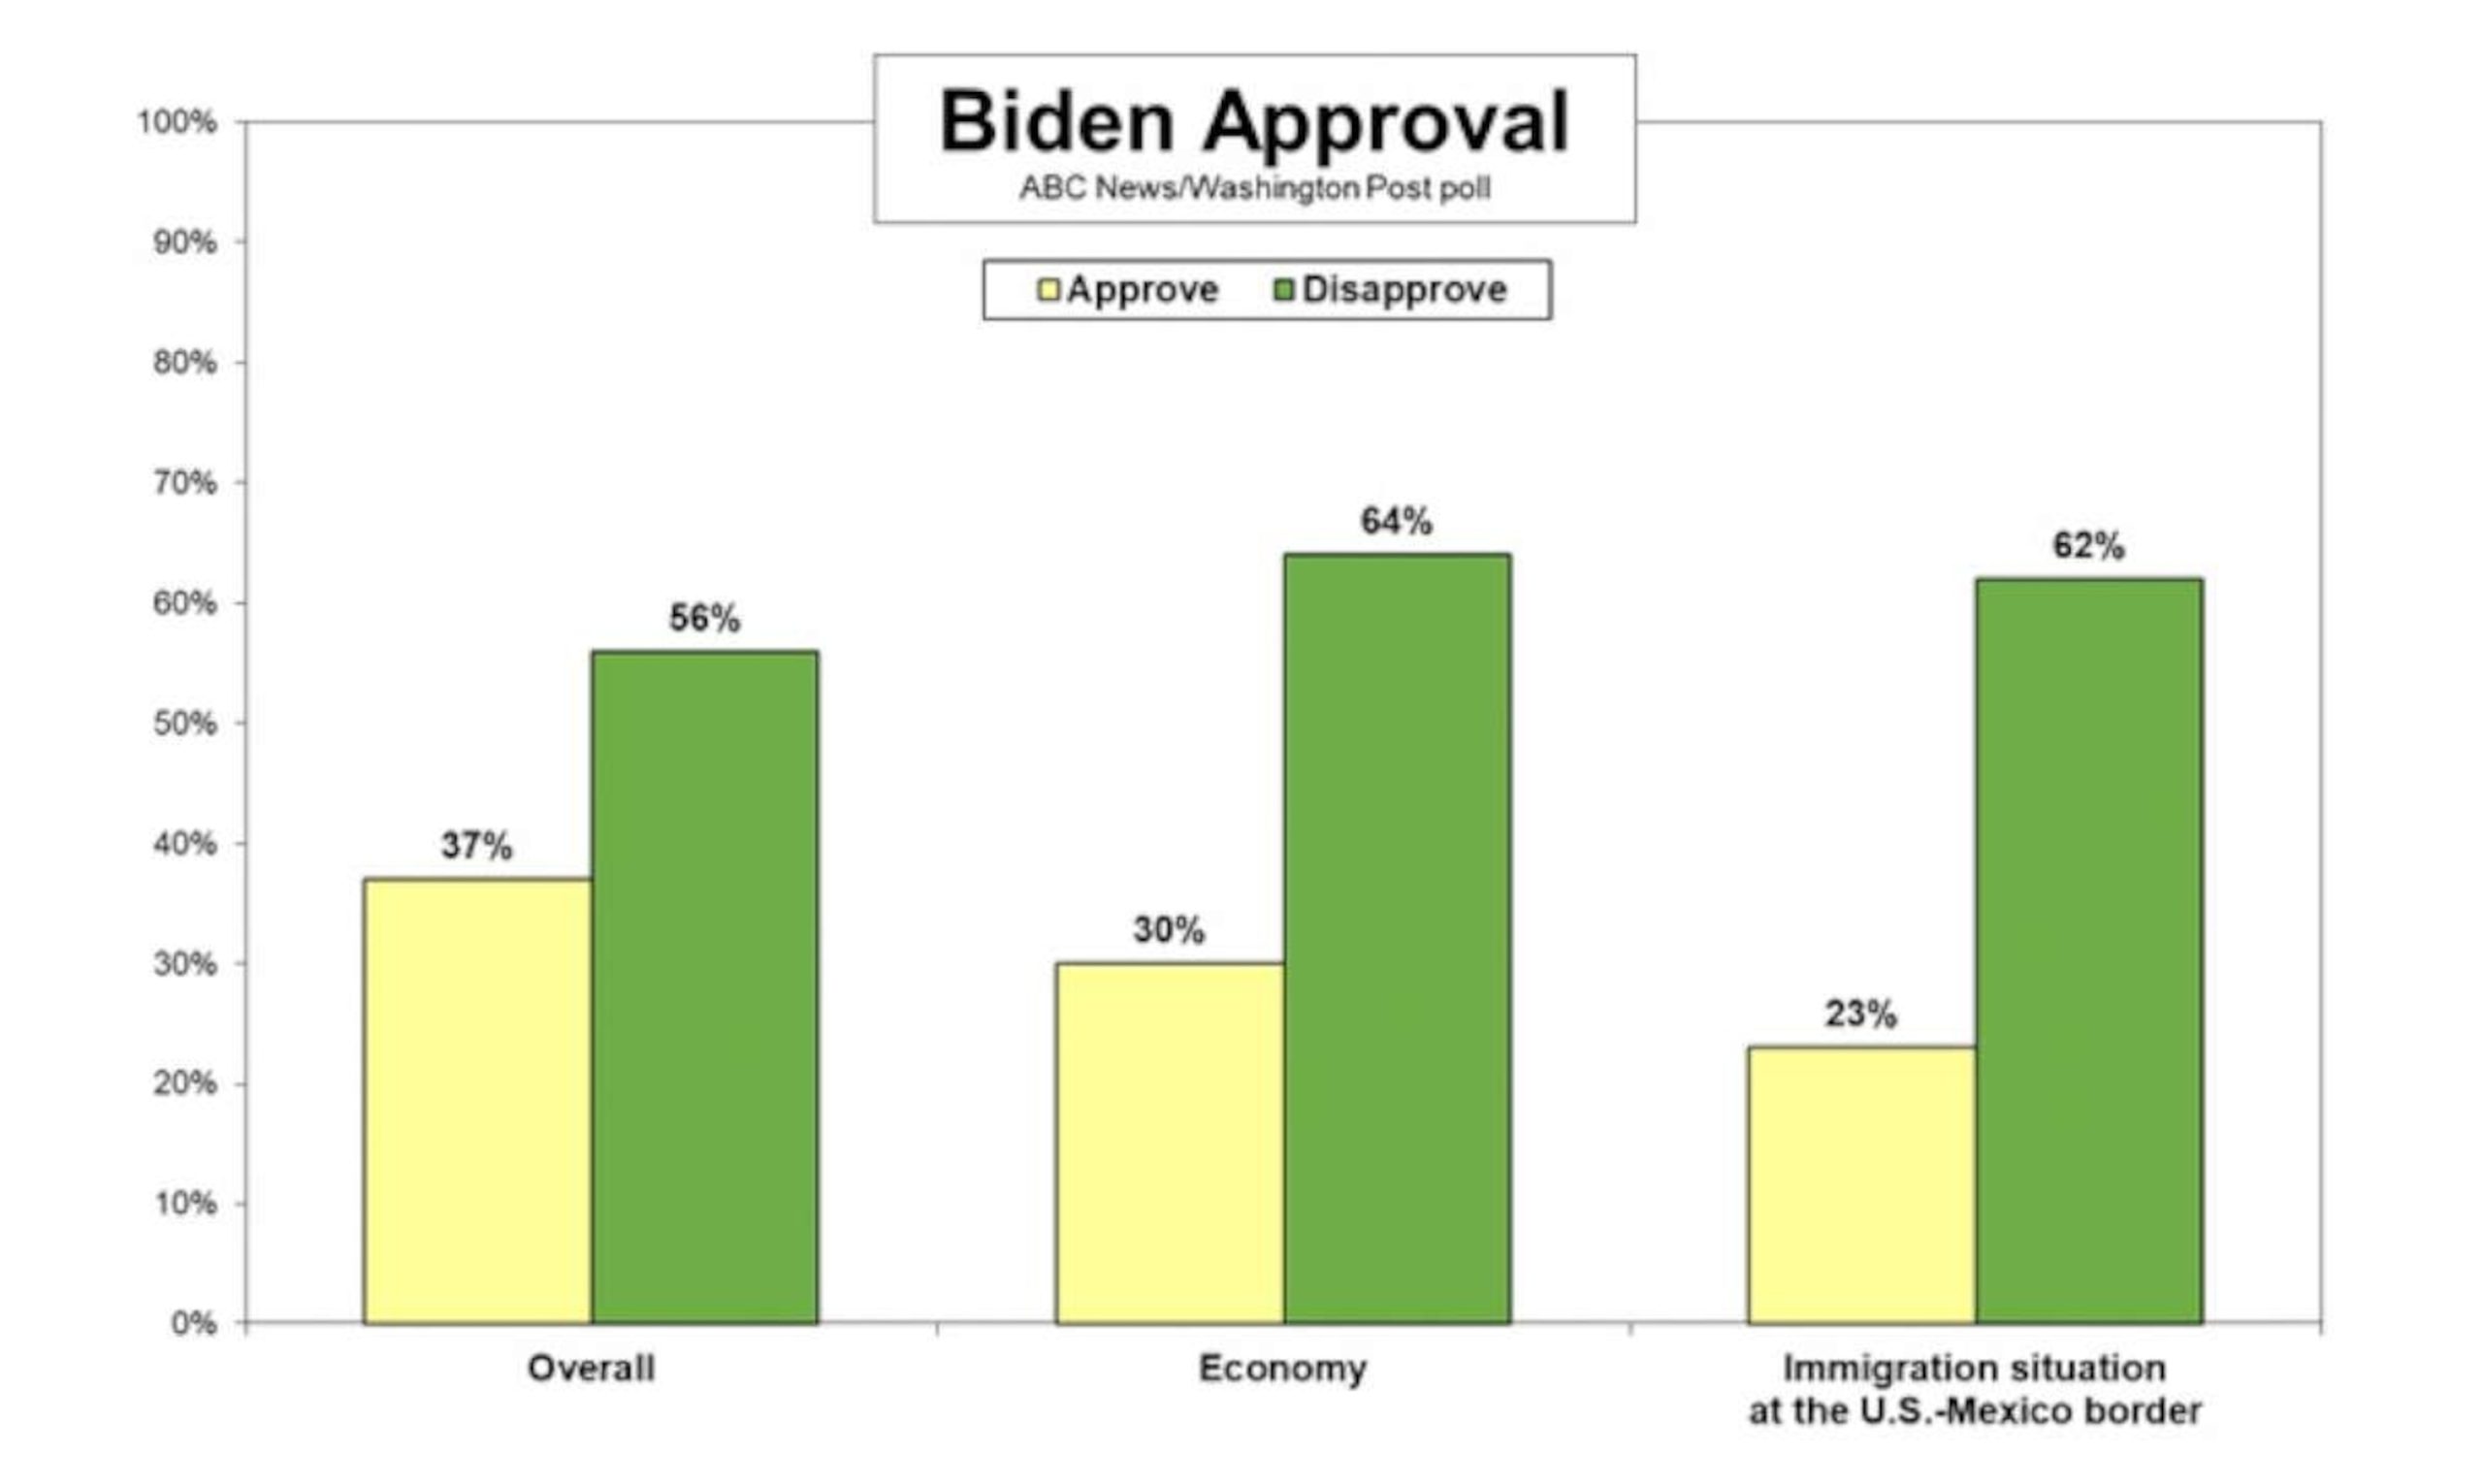 Poll reveals multiple challenges for Biden in reelection campaign, beyond just his age